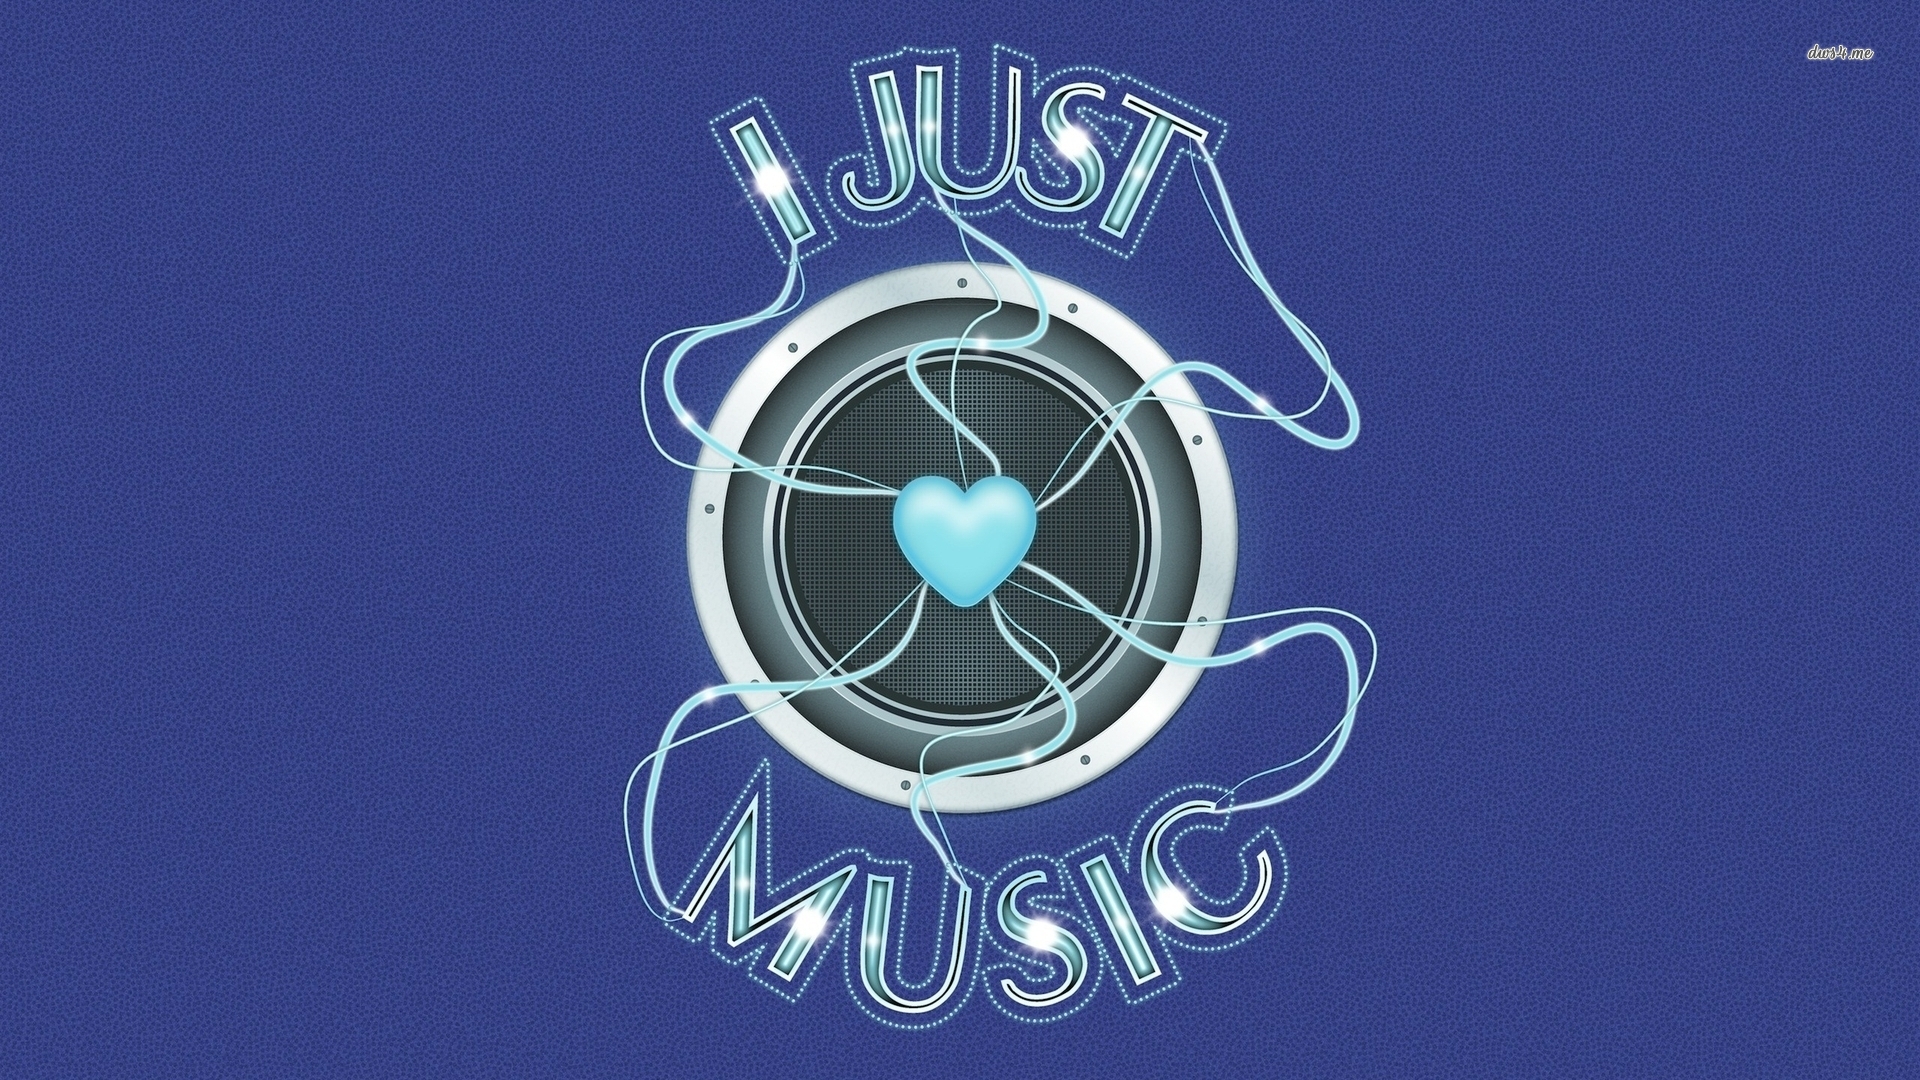 I just love music wallpaper - Music wallpapers - #35744